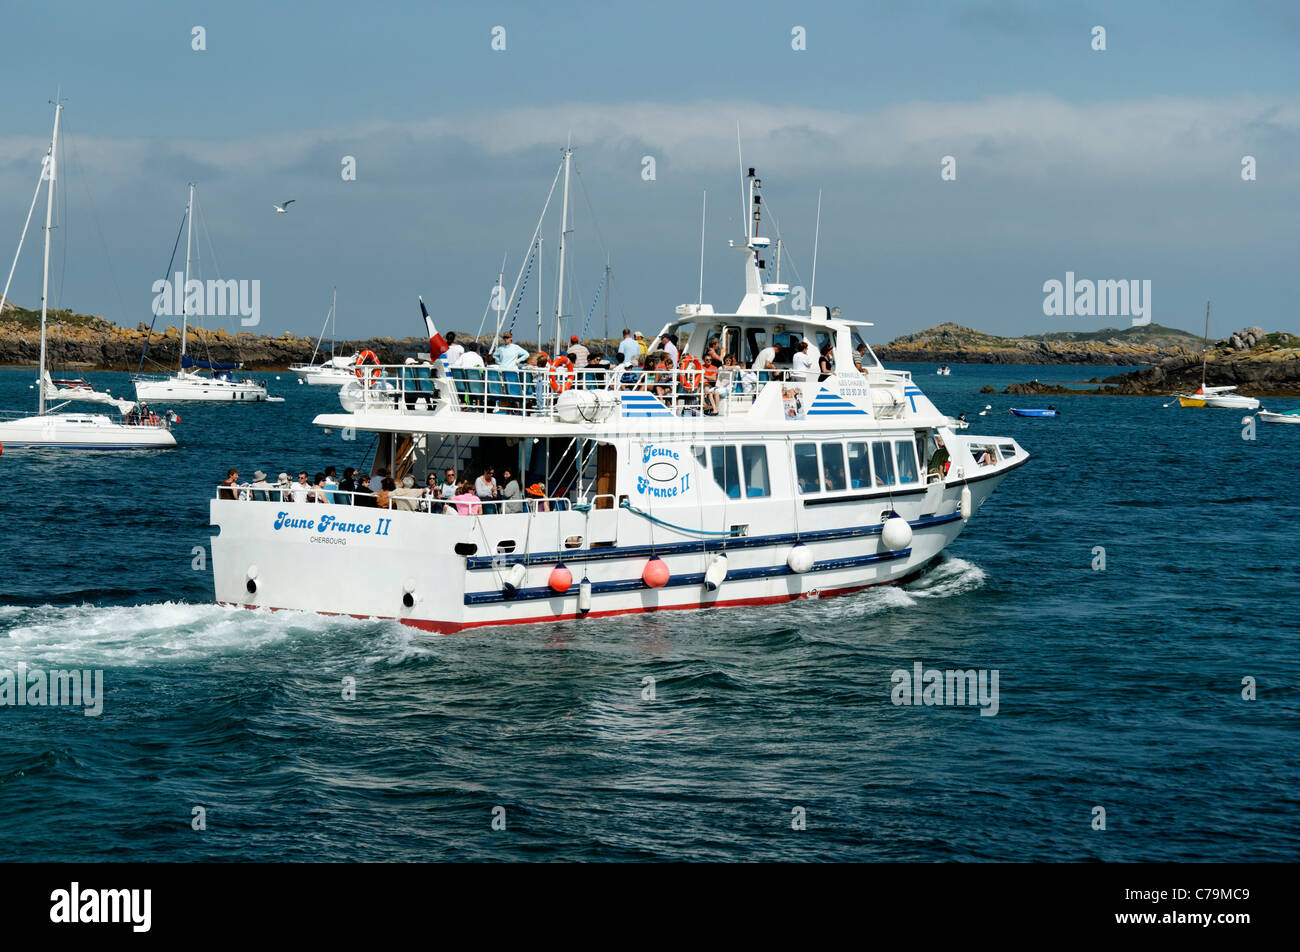 Passenger boa in the Sound in Chausey islands, sea link : Chausey islands - Granville (Manche, Normandy, France). Stock Photo